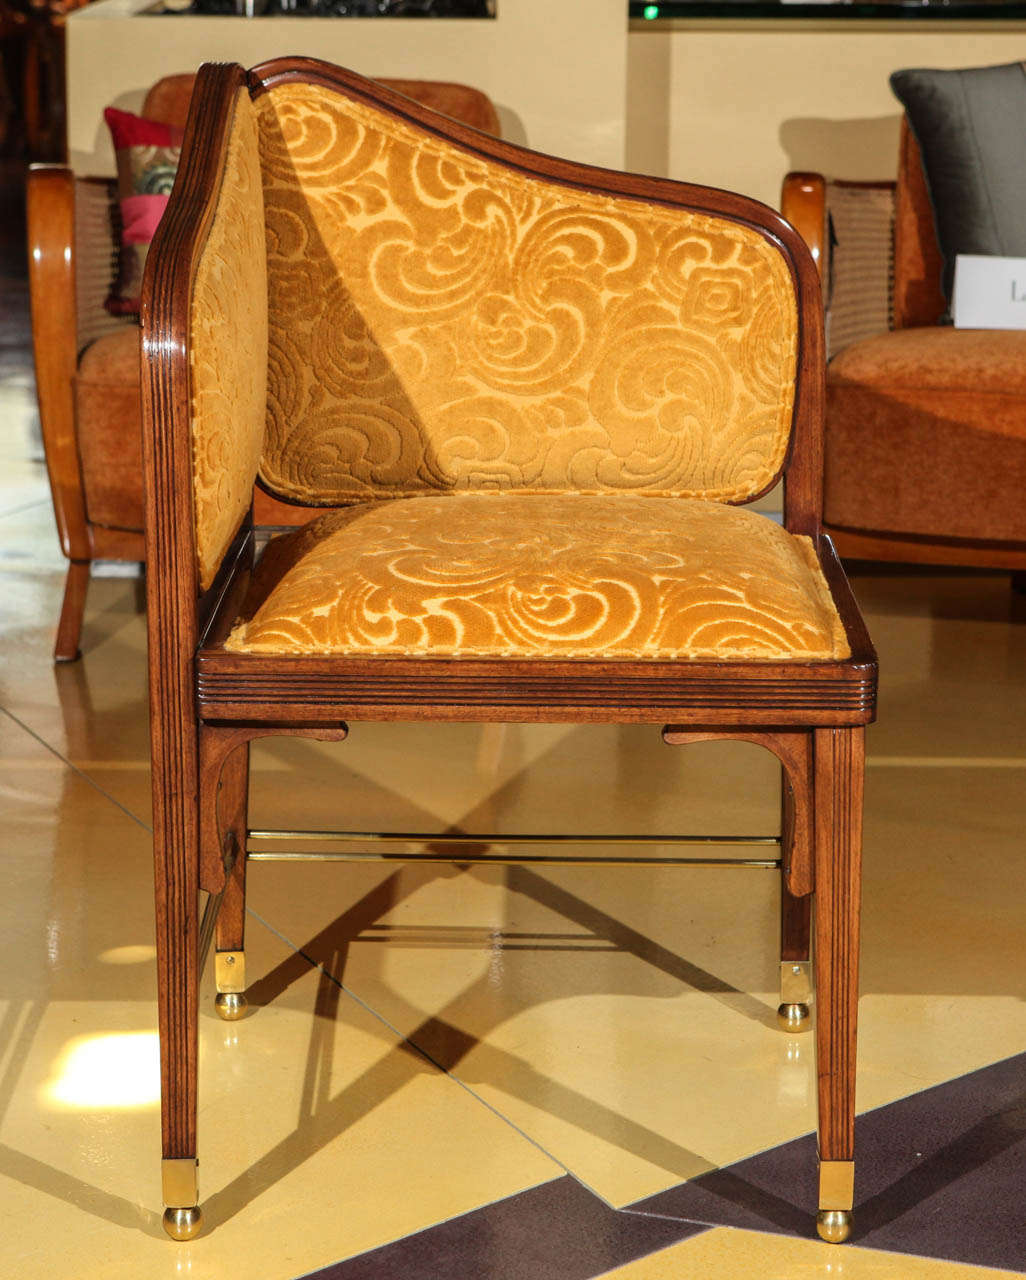 Vienna Secessionist corner chair designed by Otto Wagner and manufactured by J. & J. Kohn, new fabric.